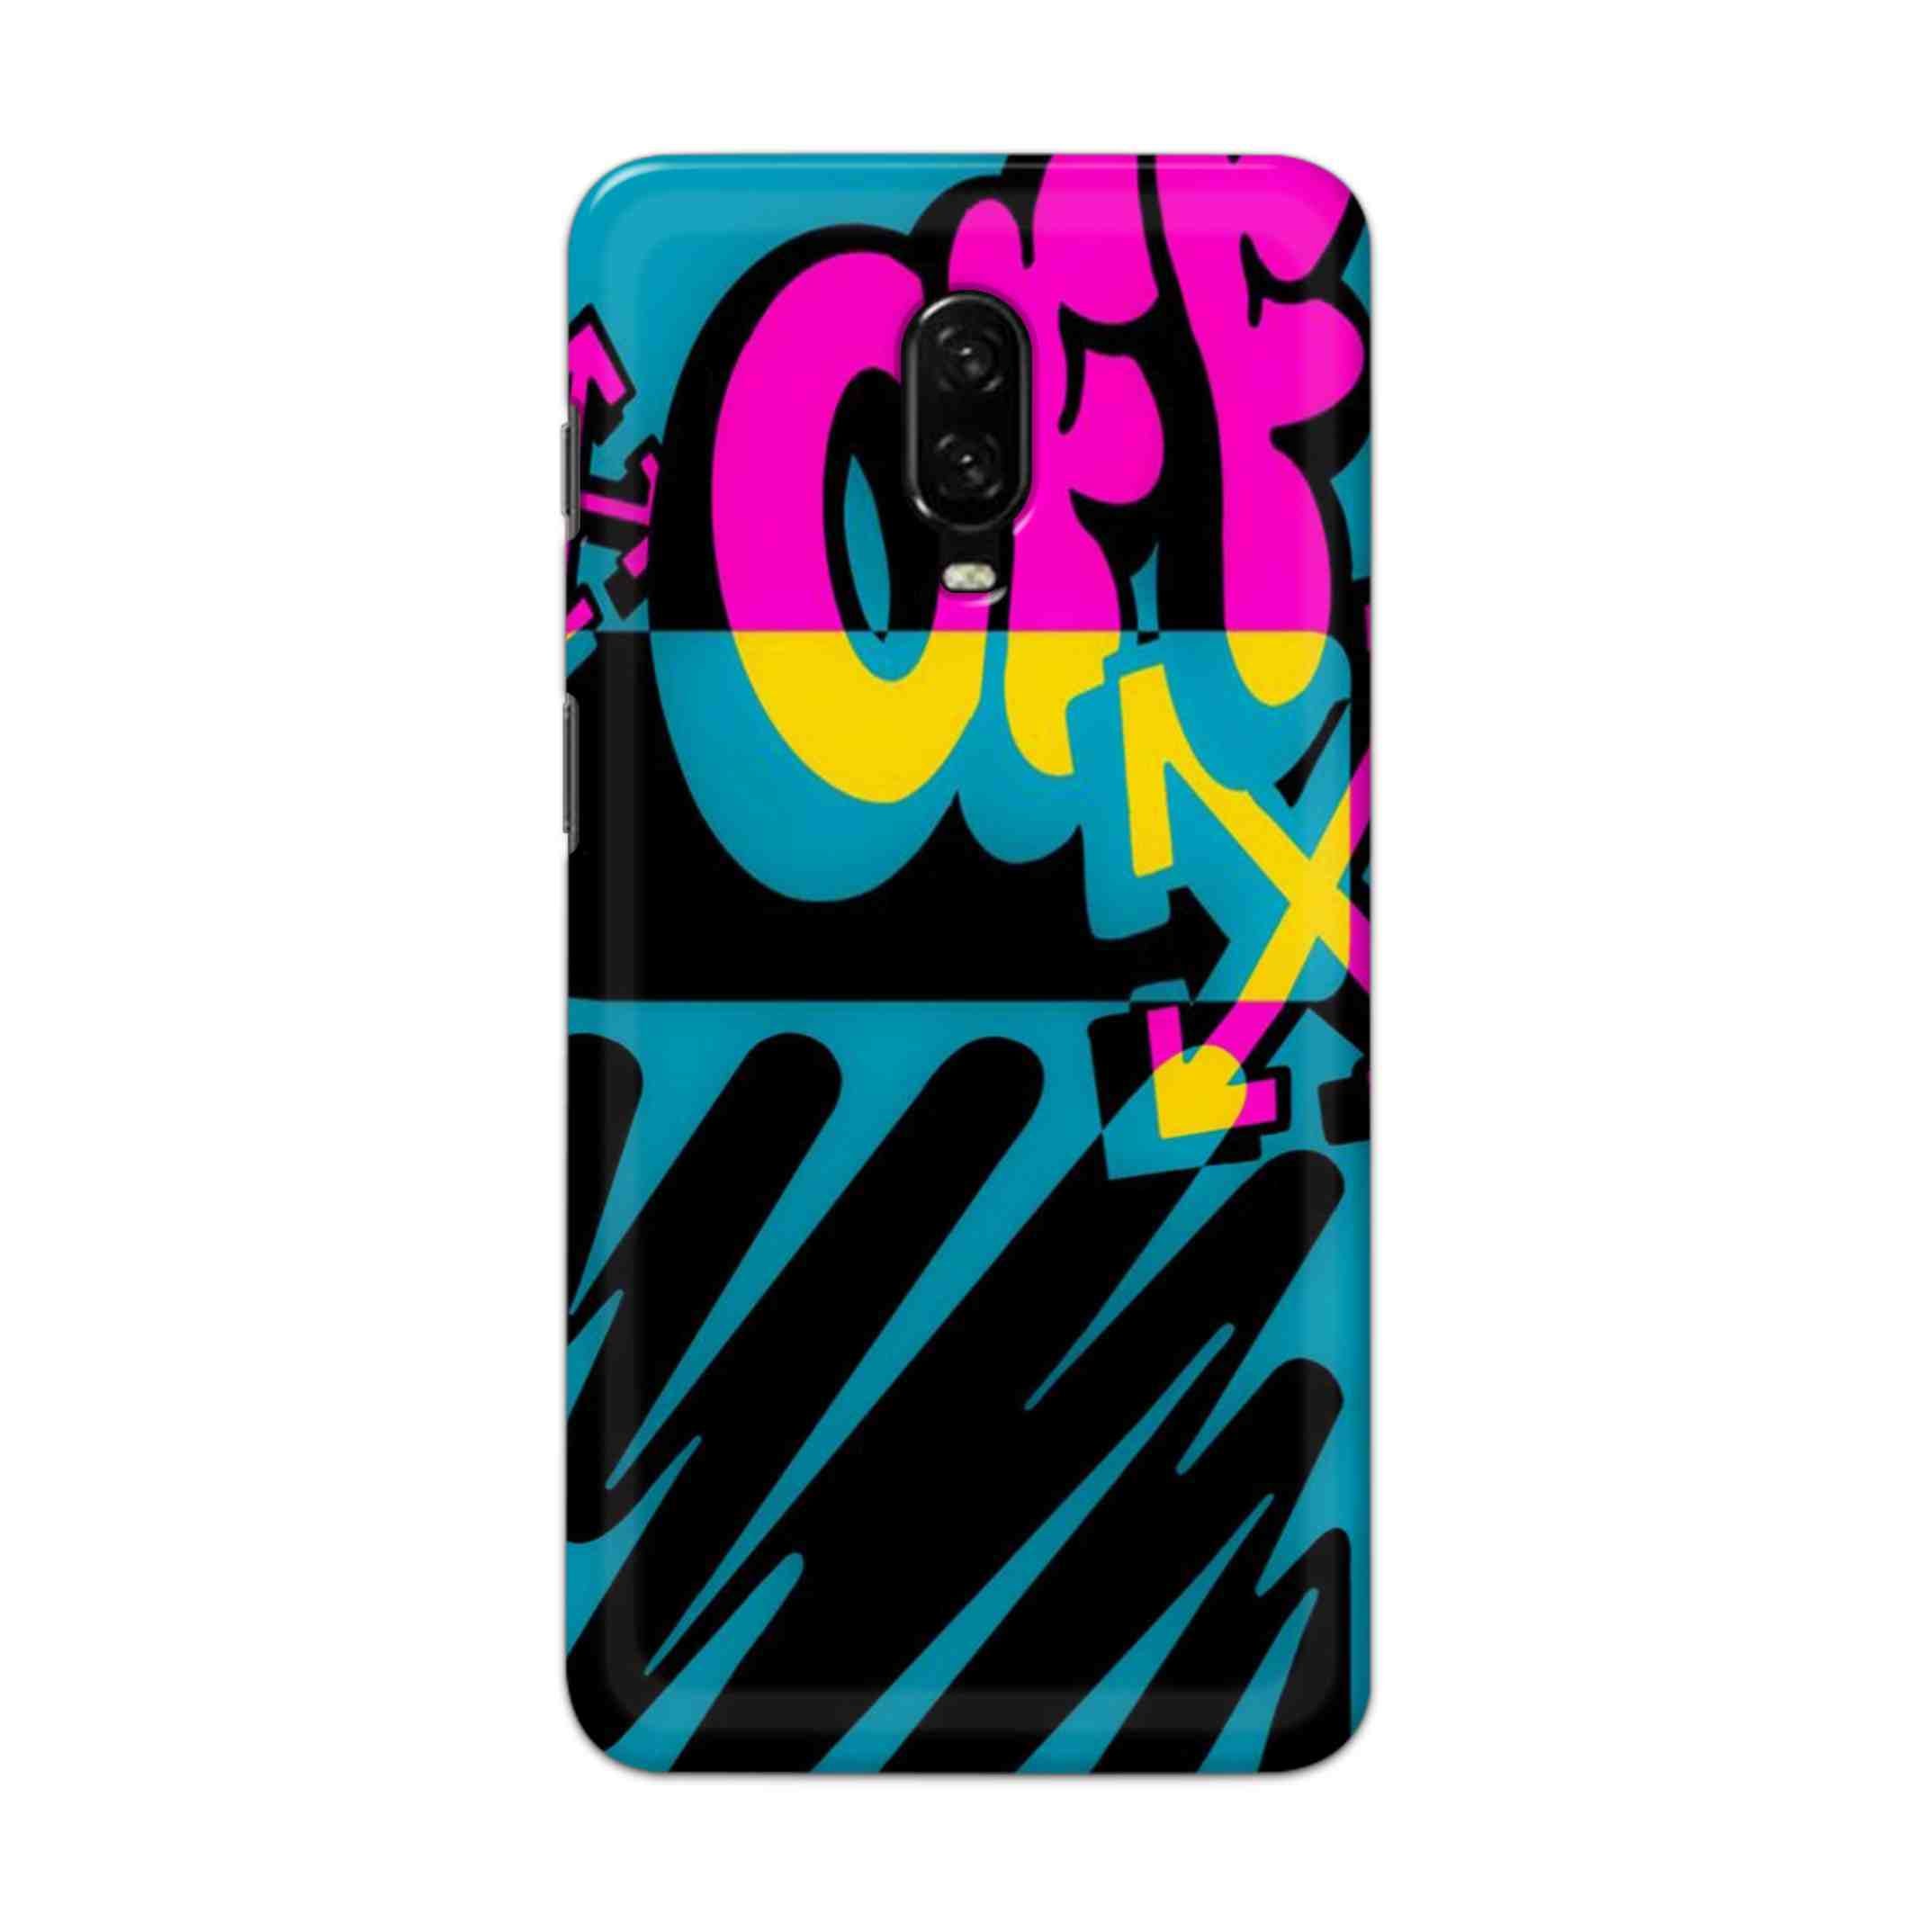 Buy Off Hard Back Mobile Phone Case Cover For OnePlus 6T Online